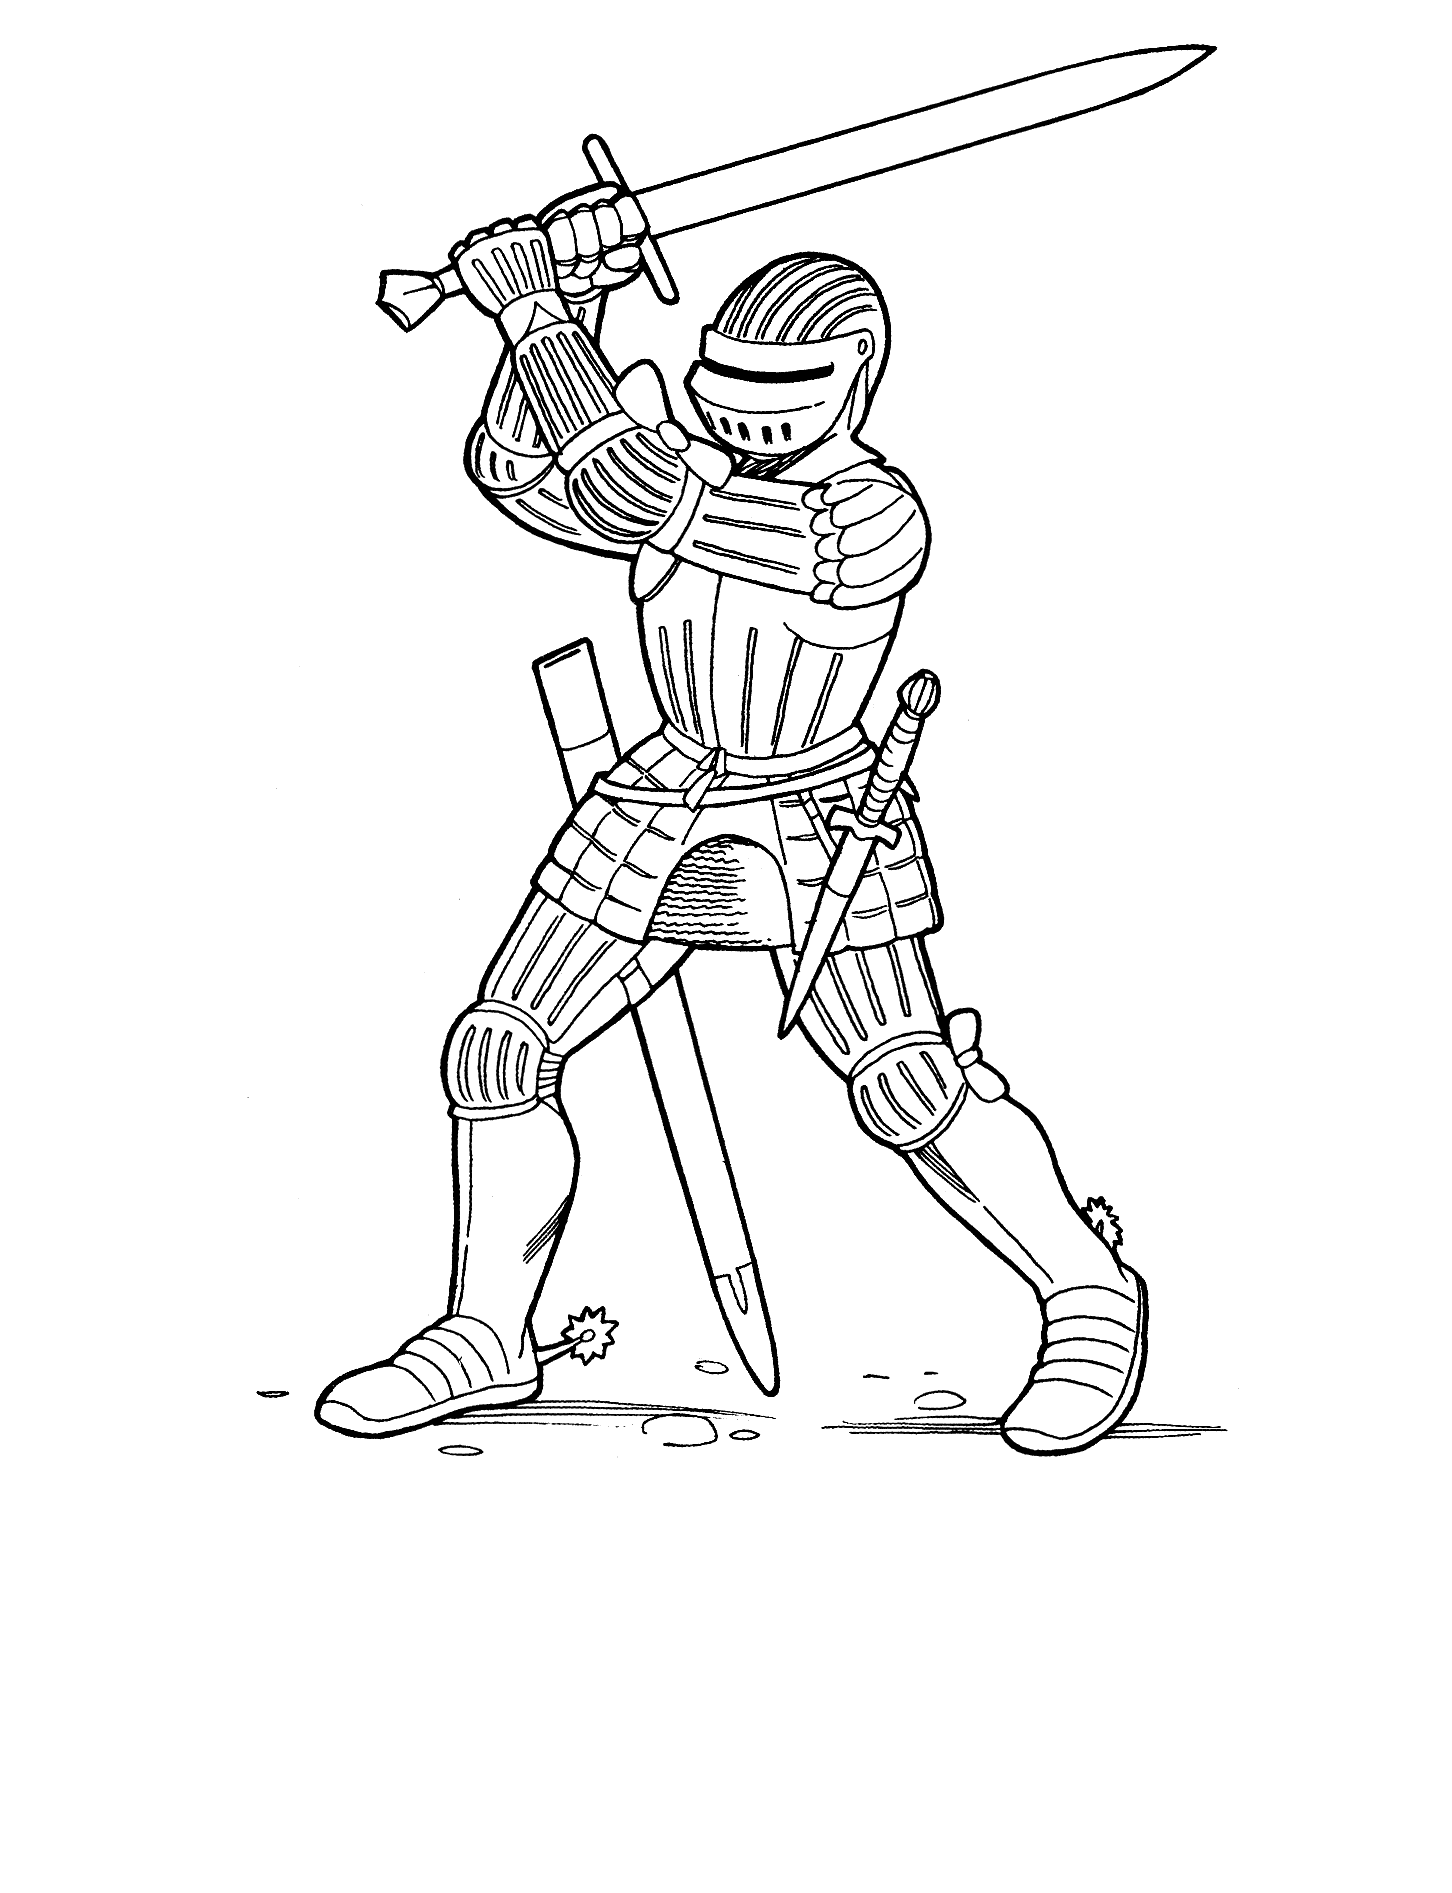 Knight Coloring Pages Printable - Coloring Home